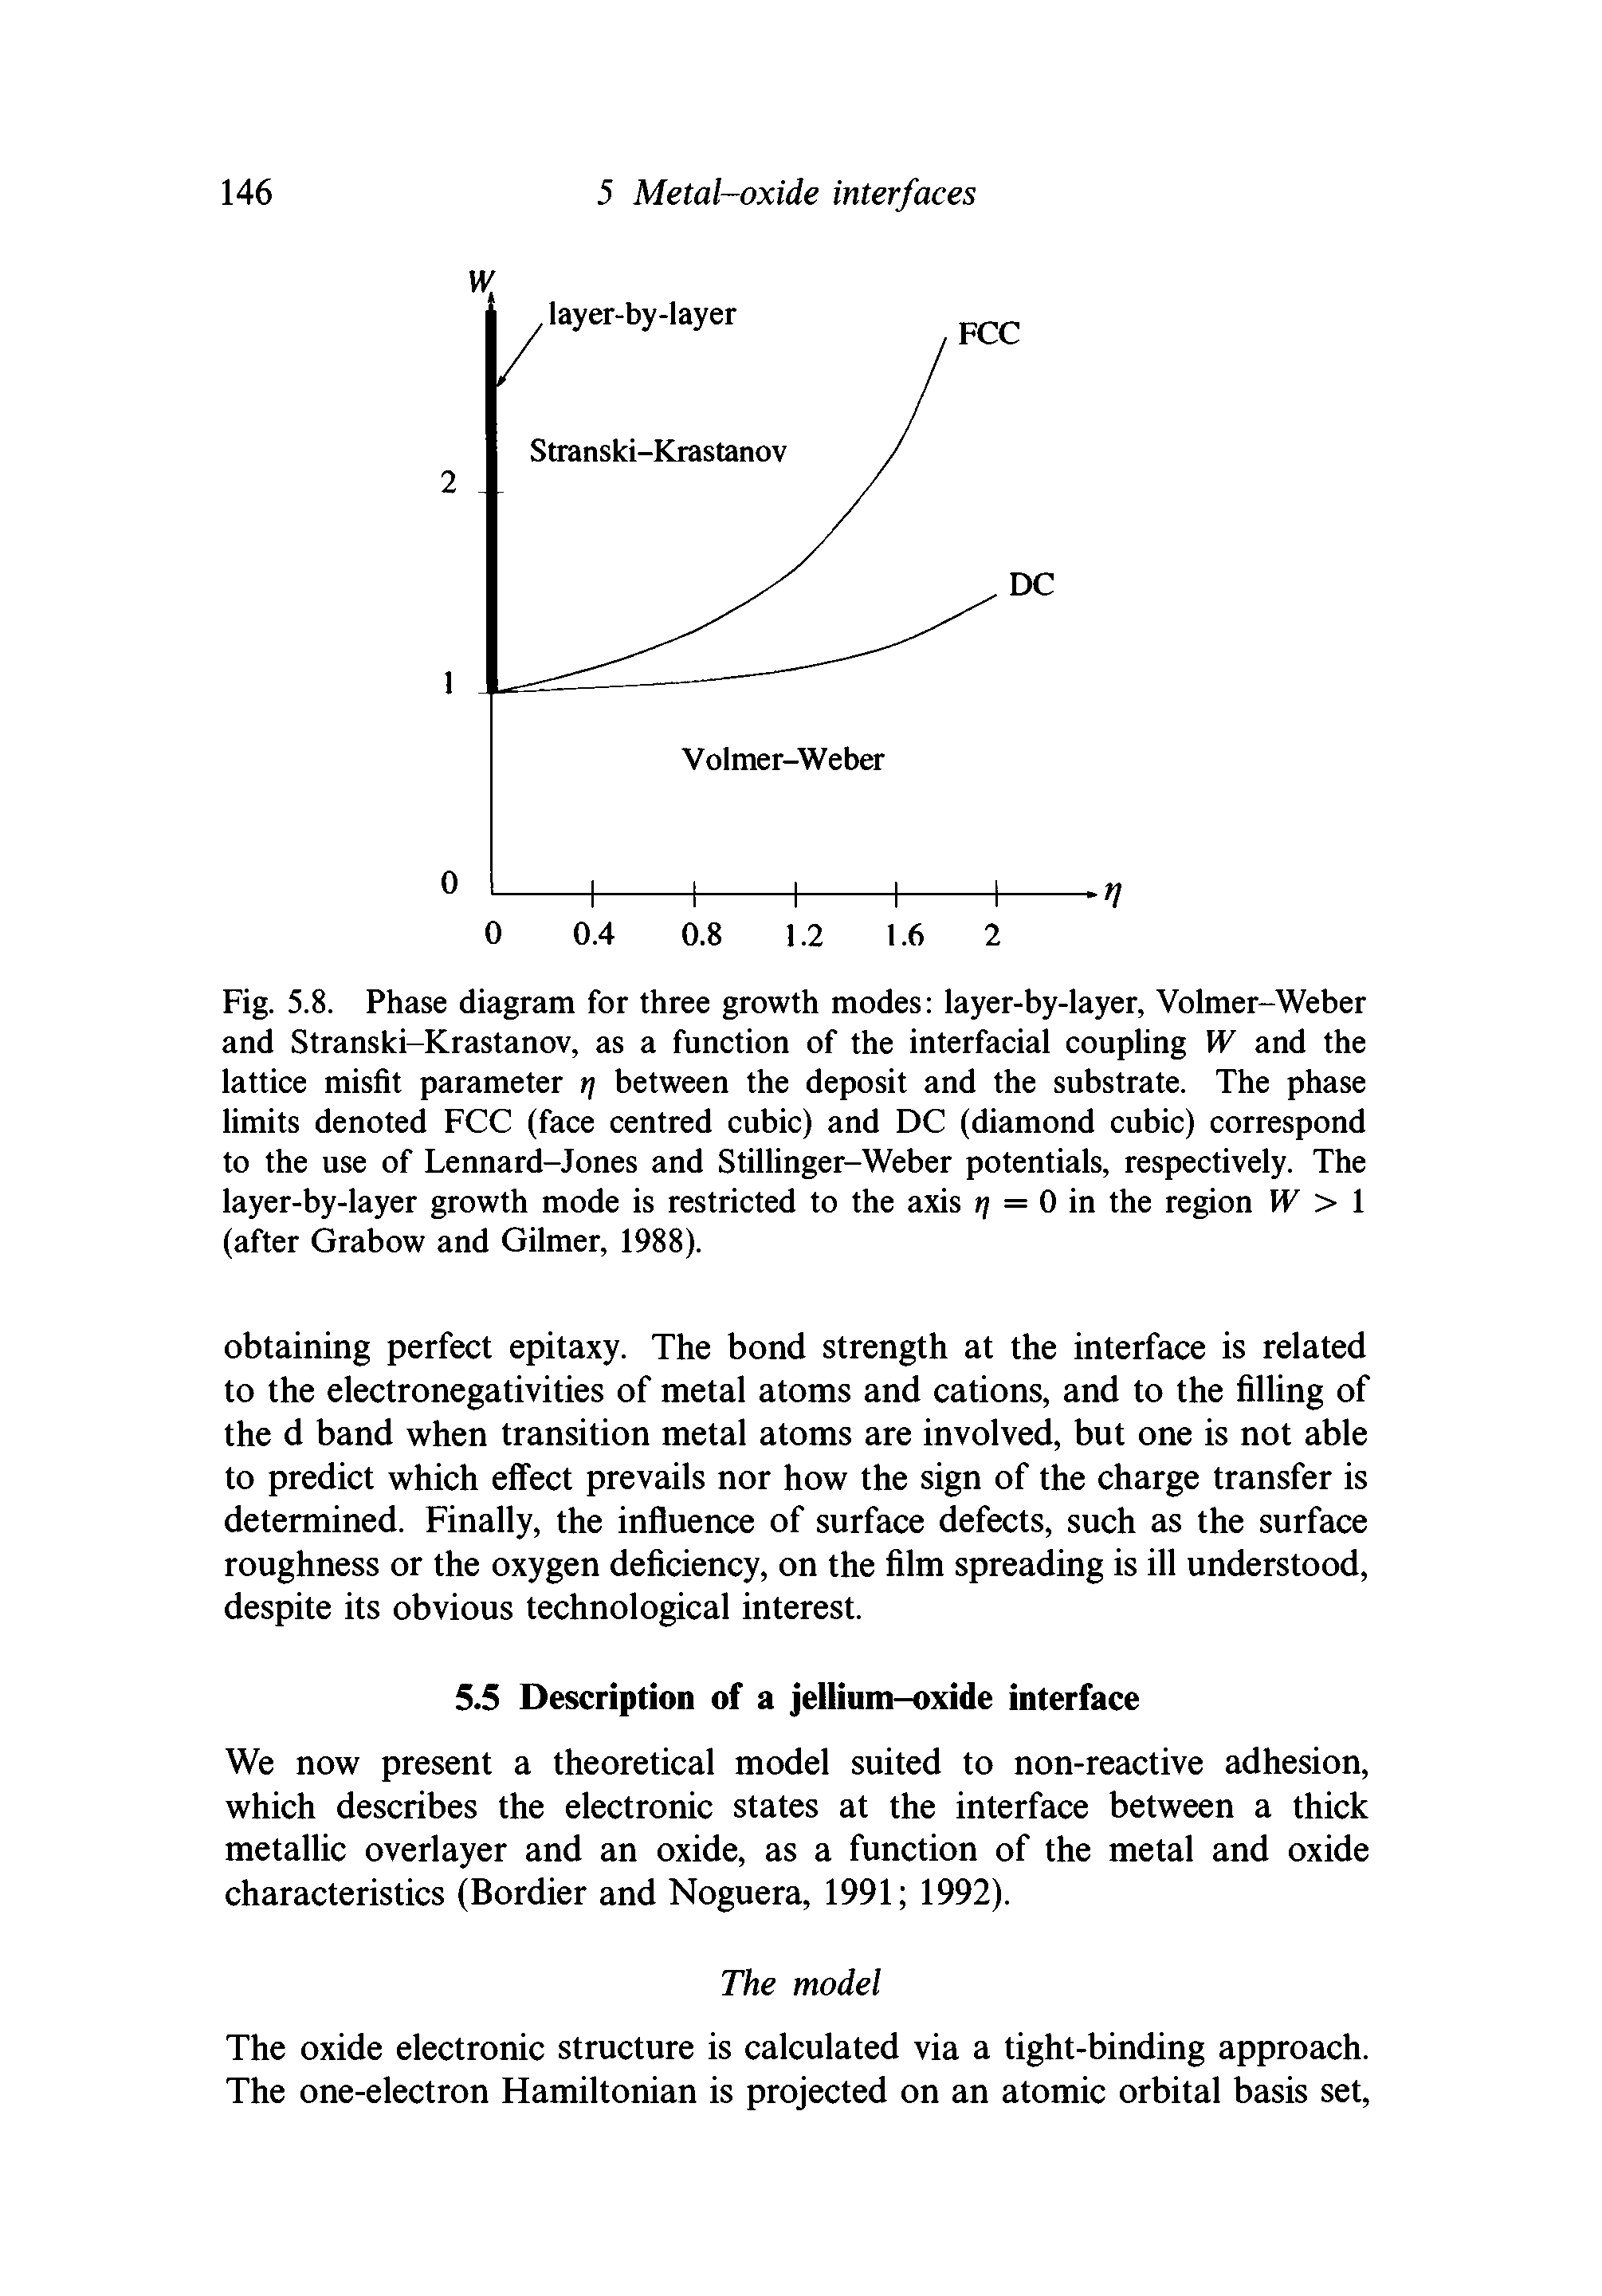 Fig. 5.8. Phase diagram for three growth modes layer-by-layer, Volmer-Weber and Stranski-Krastanov, as a function of the interfacial coupling W and the lattice misfit parameter r] between the deposit and the substrate. The phase limits denoted FCC (face centred cubic) and DC (diamond cubic) correspond to the use of Lennard-Jones and Stillinger-Weber potentials, respectively. The layer-by-layer growth mode is restricted to the axis r] = 0 in the region W > I (after Grabow and Gilmer, 1988).